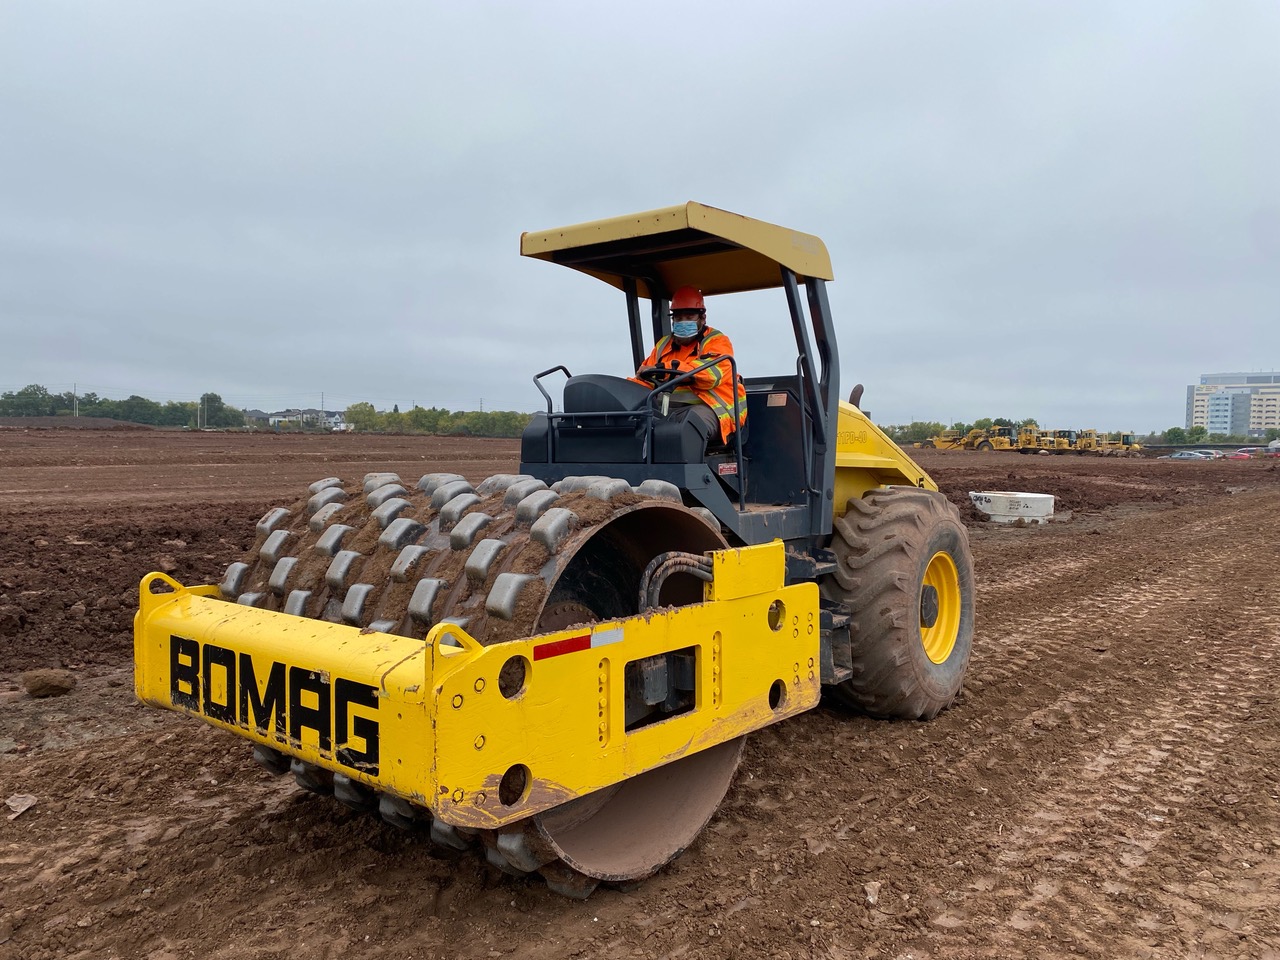 Patrick Doussept operating a Bomag sheep’s foot packer